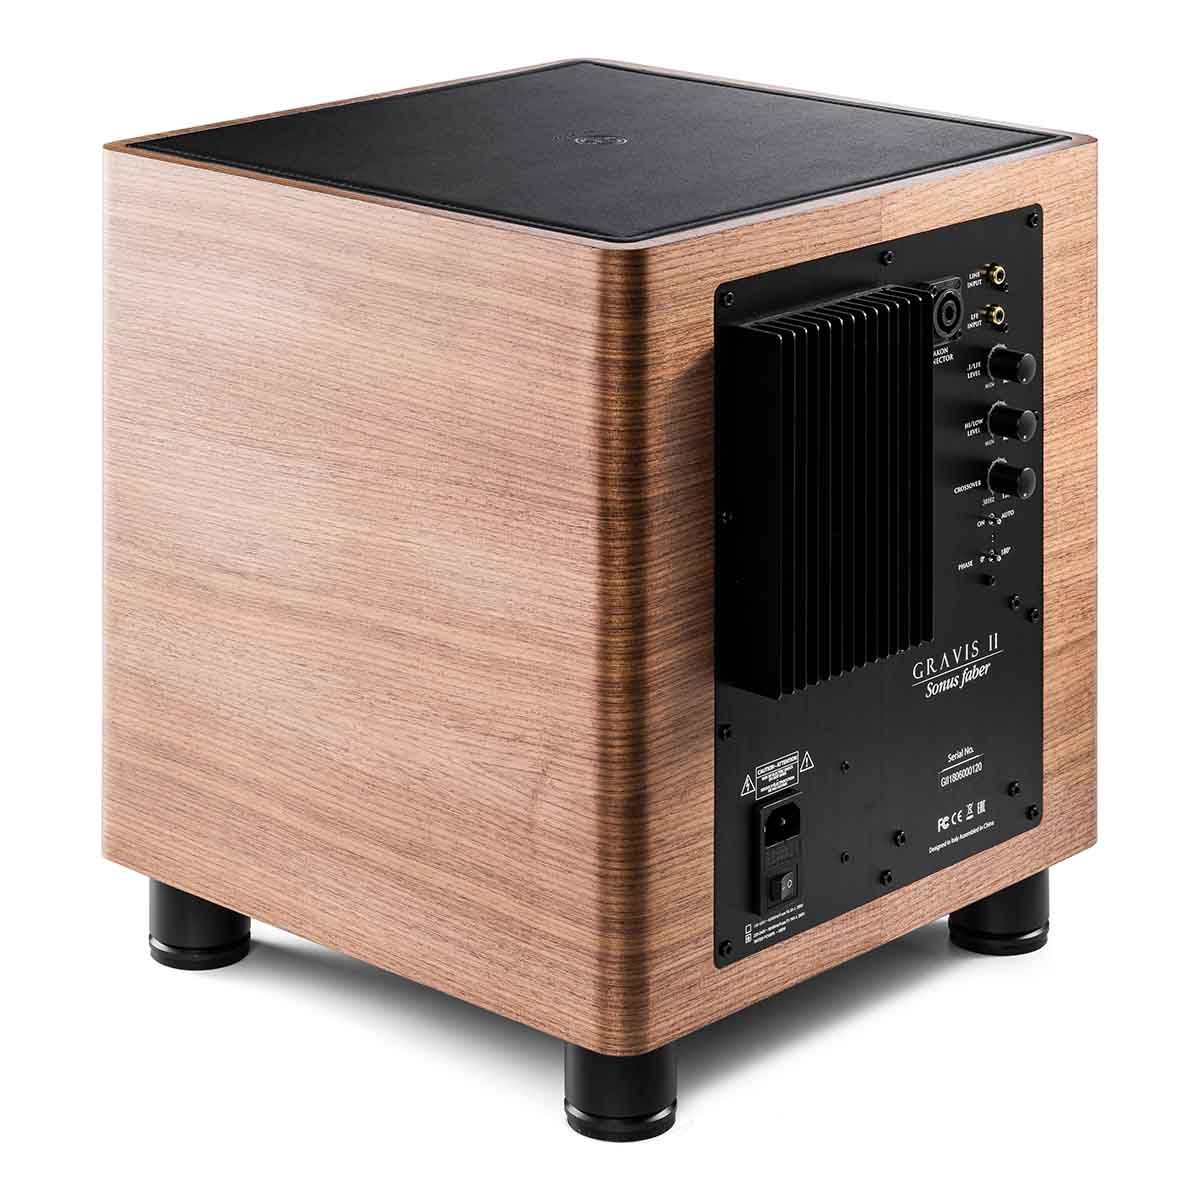 Sonus Faber Gravis II 10" Powered Subwoofer wood angled rear view